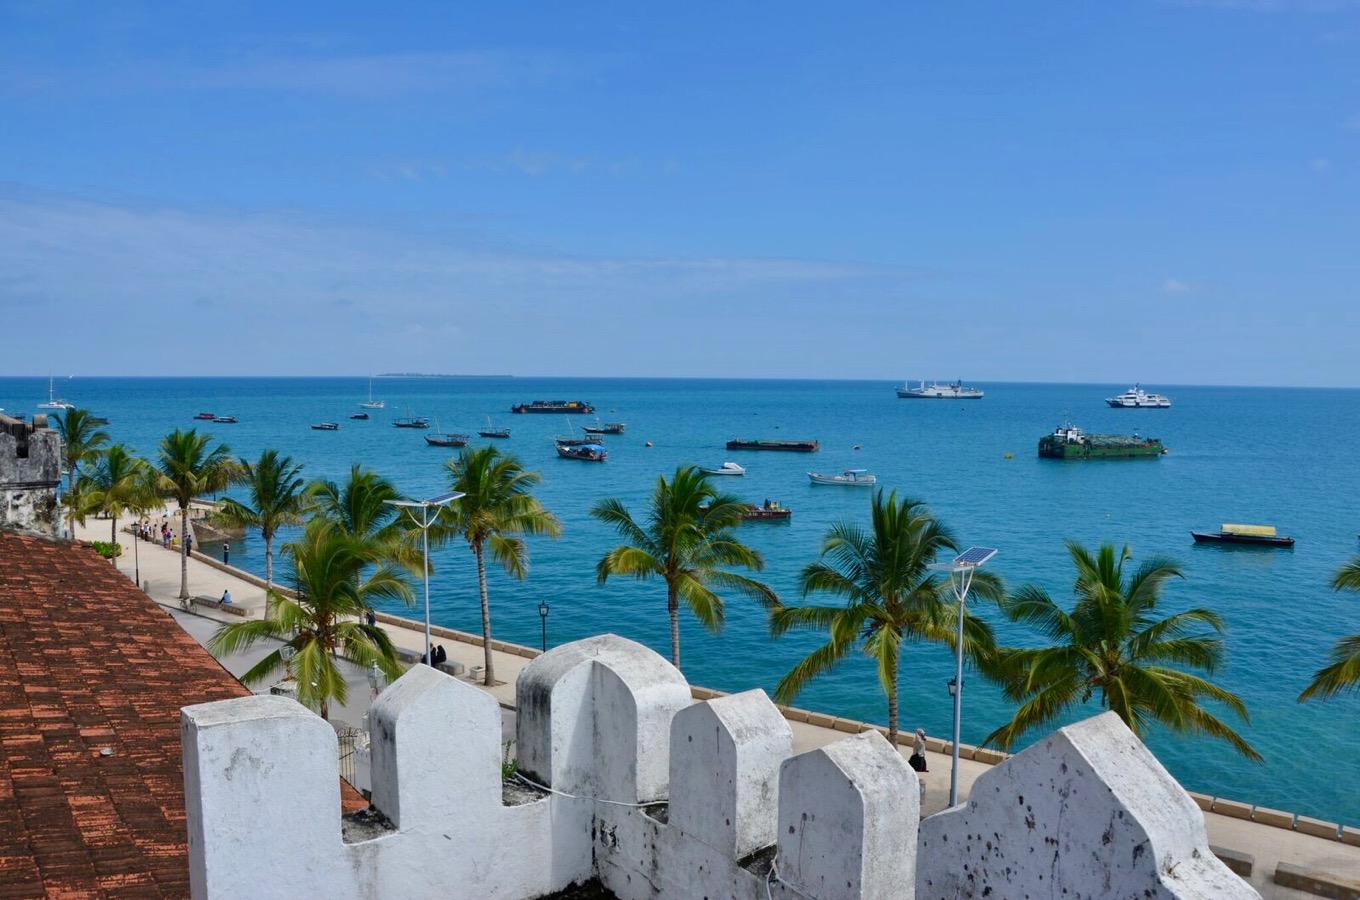 View of the harbour of Stone Town, the capital of Zanzibar